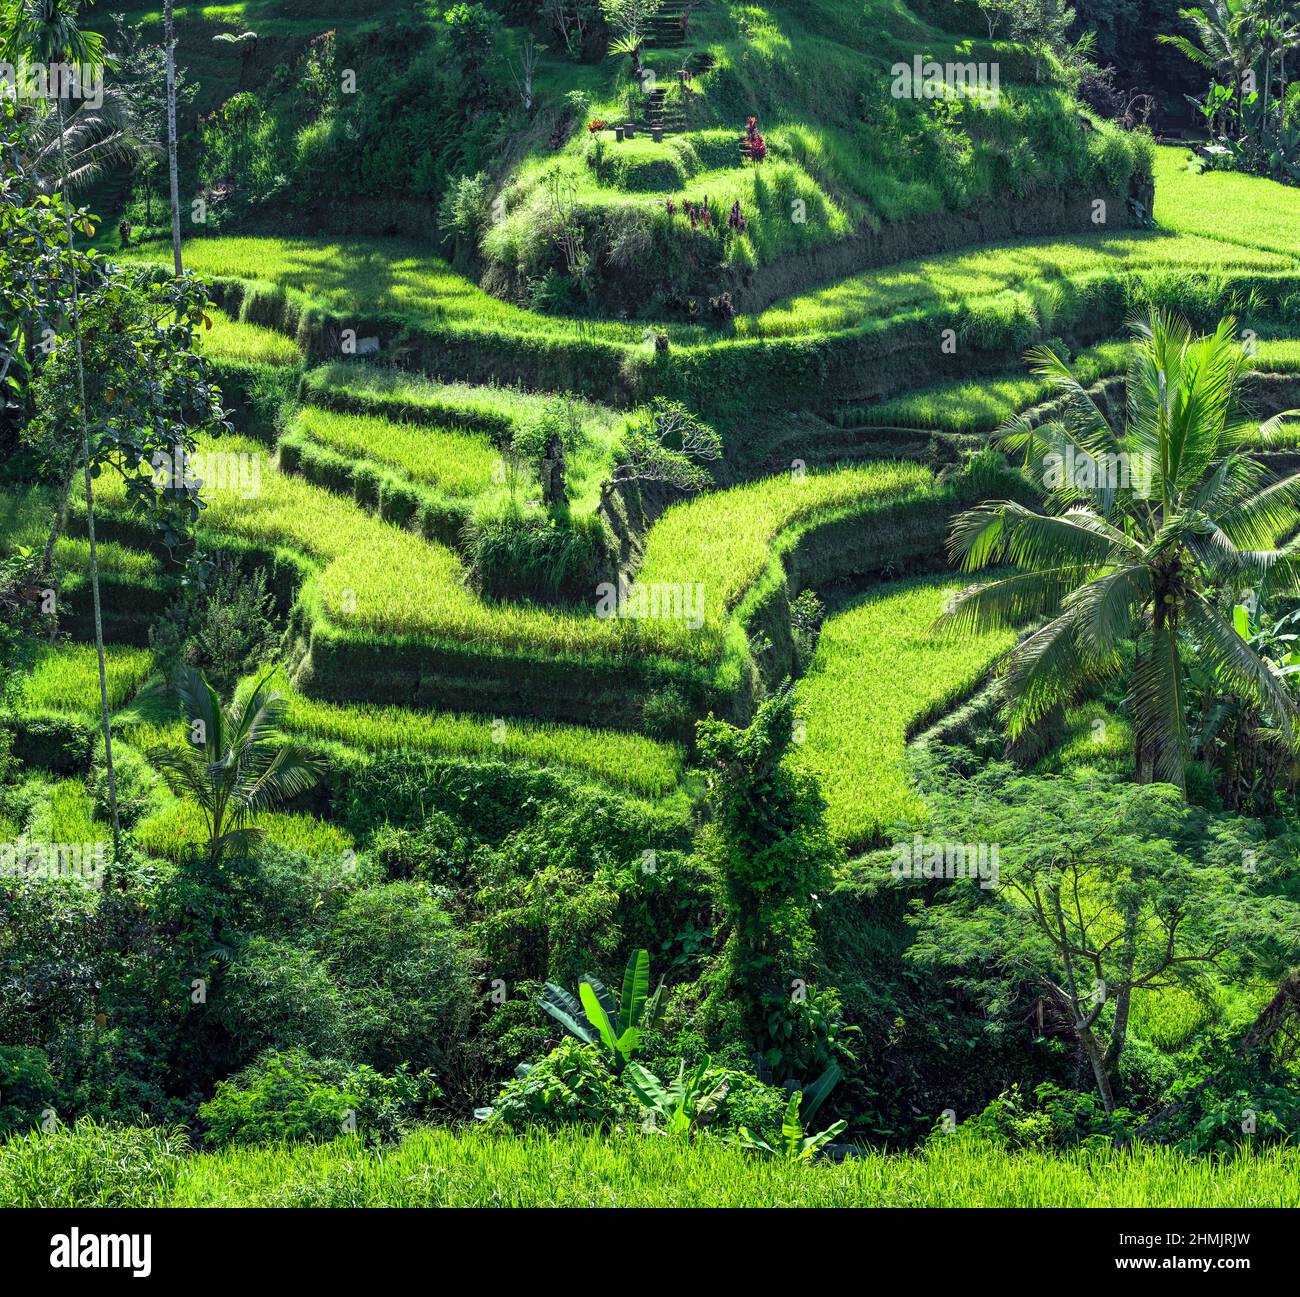 Landscape of sunny day with green rice terraces near Tegallalang village, Bali, Indonesia. Spectacular rice fields. Garden with tall palm trees. Roman Stock Photo